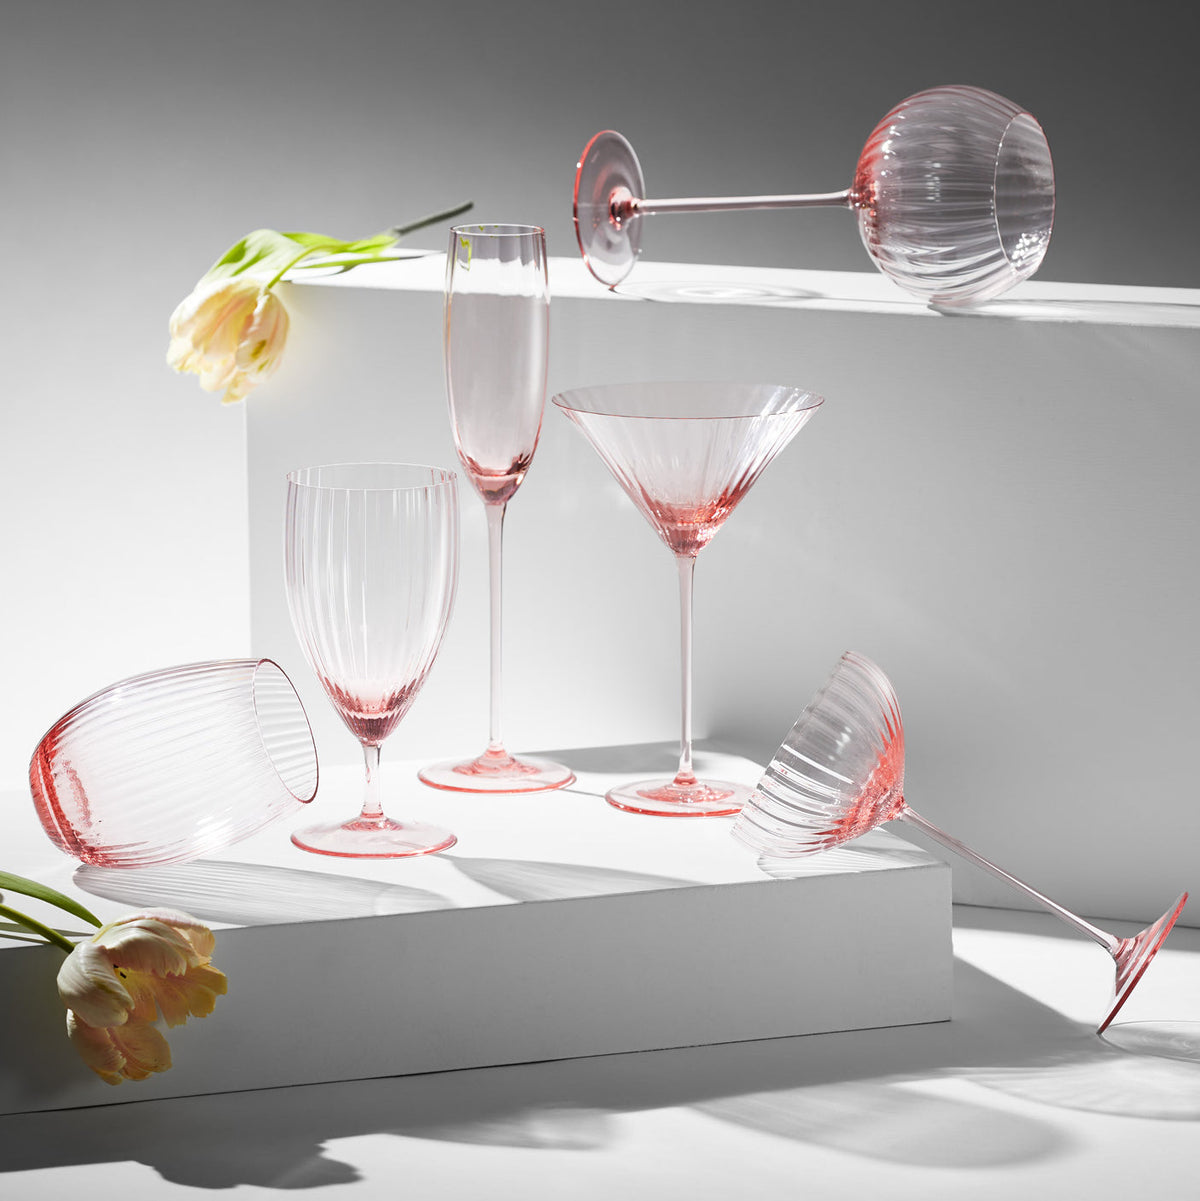 Quinn rose pink mouth-blown crystal everyday glasses from Caskata.